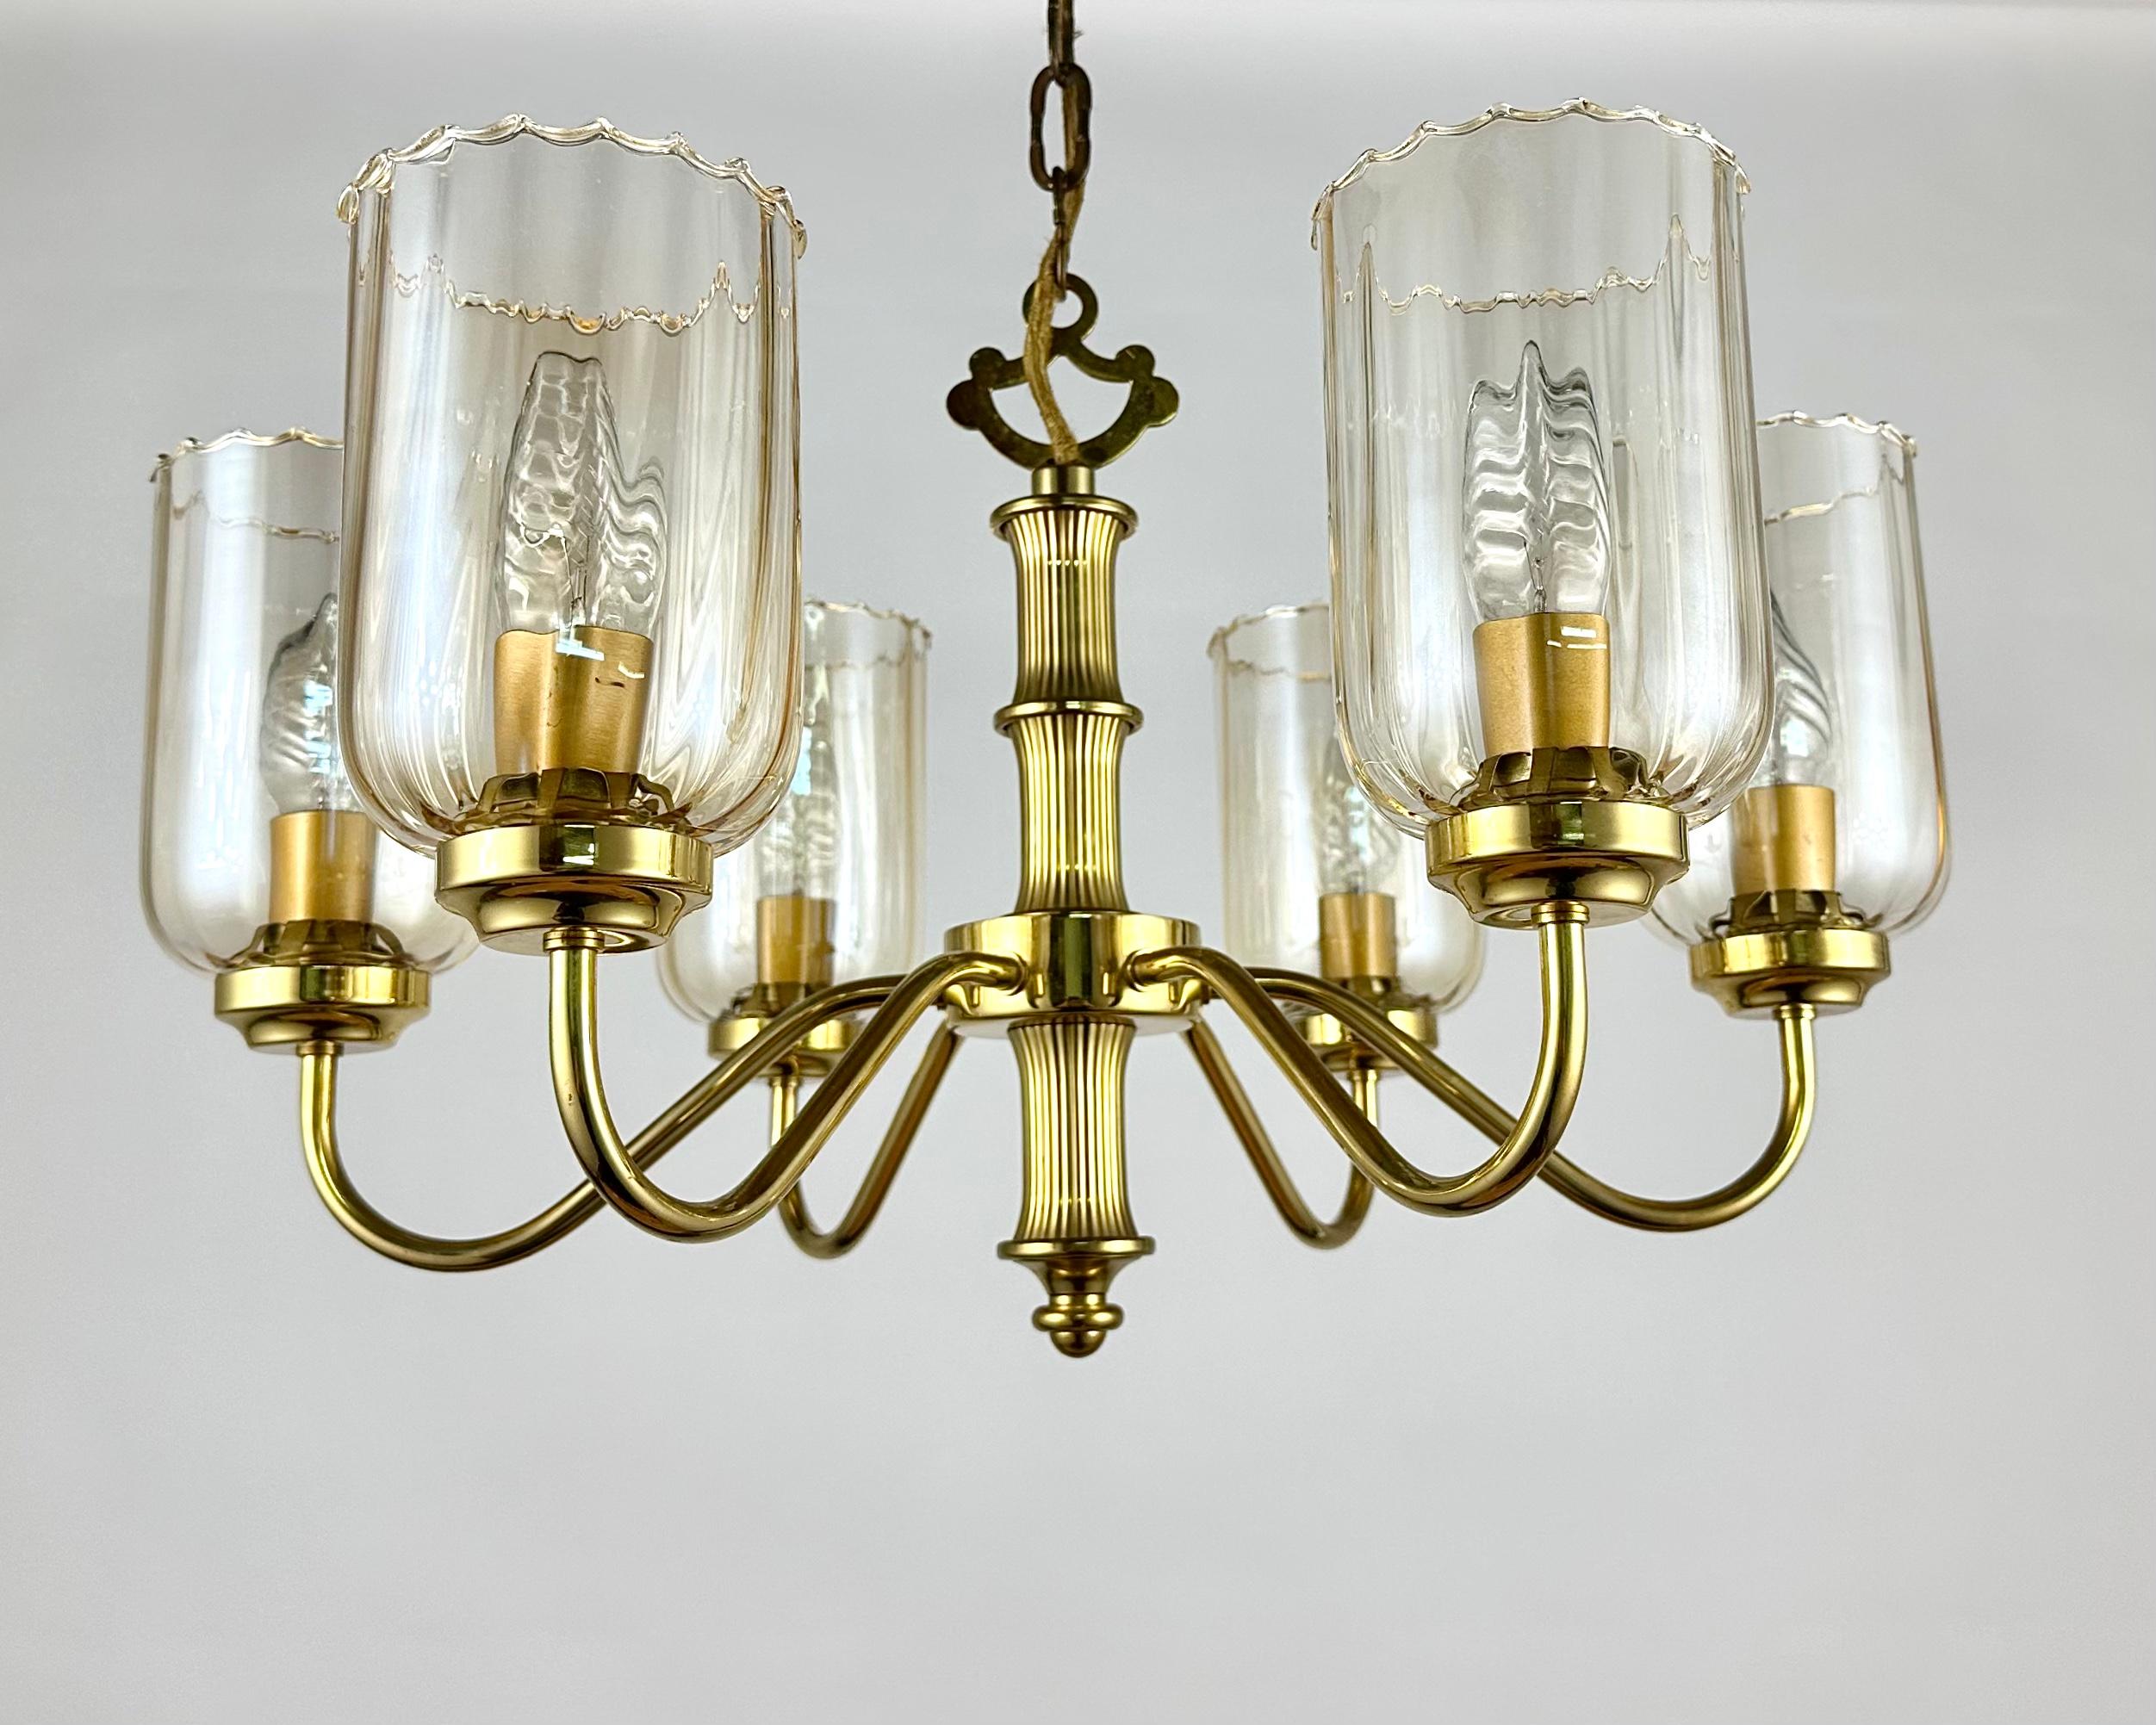 Vintage Ceiling Chandelier With Six Glass Lampshades, Germany, 1970s For Sale 5